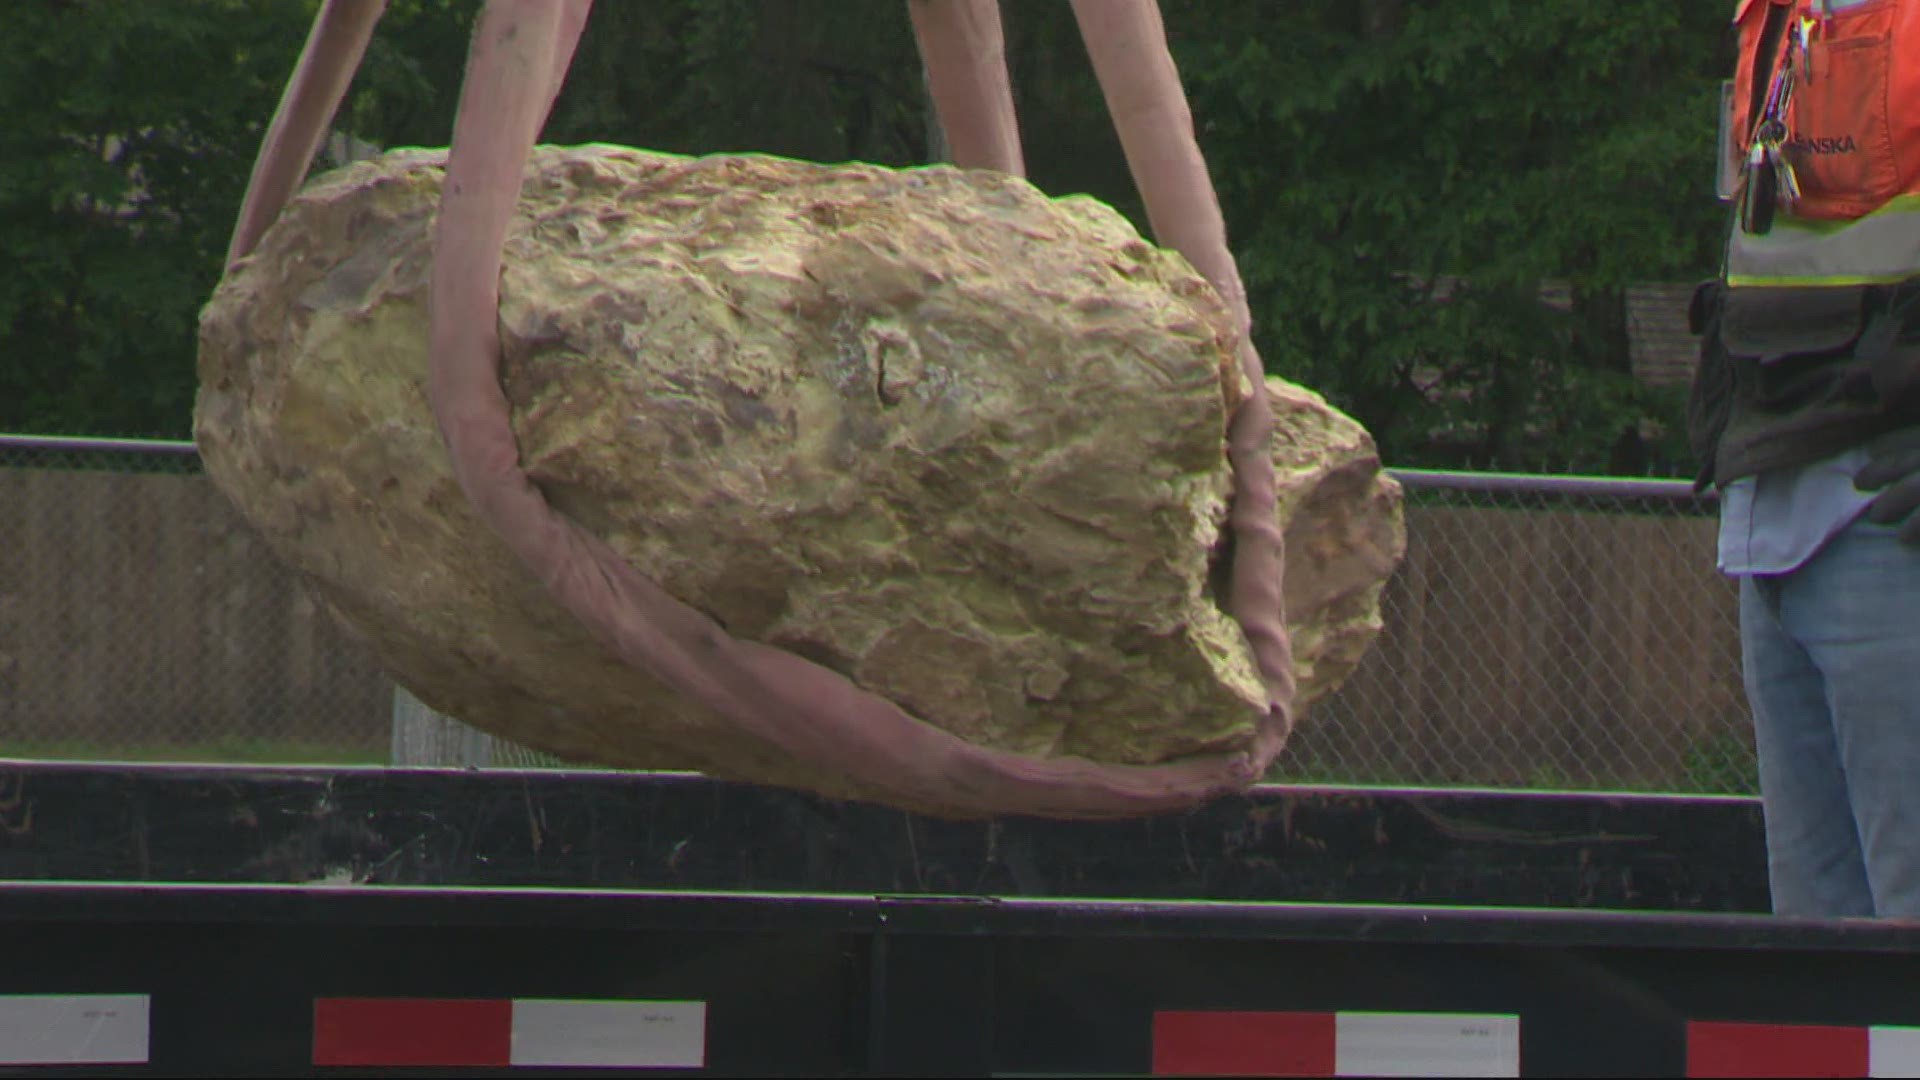 A giant boulder found at a construction site in Lake Oswego has geological significance. Ashley Korslien gives us a look.